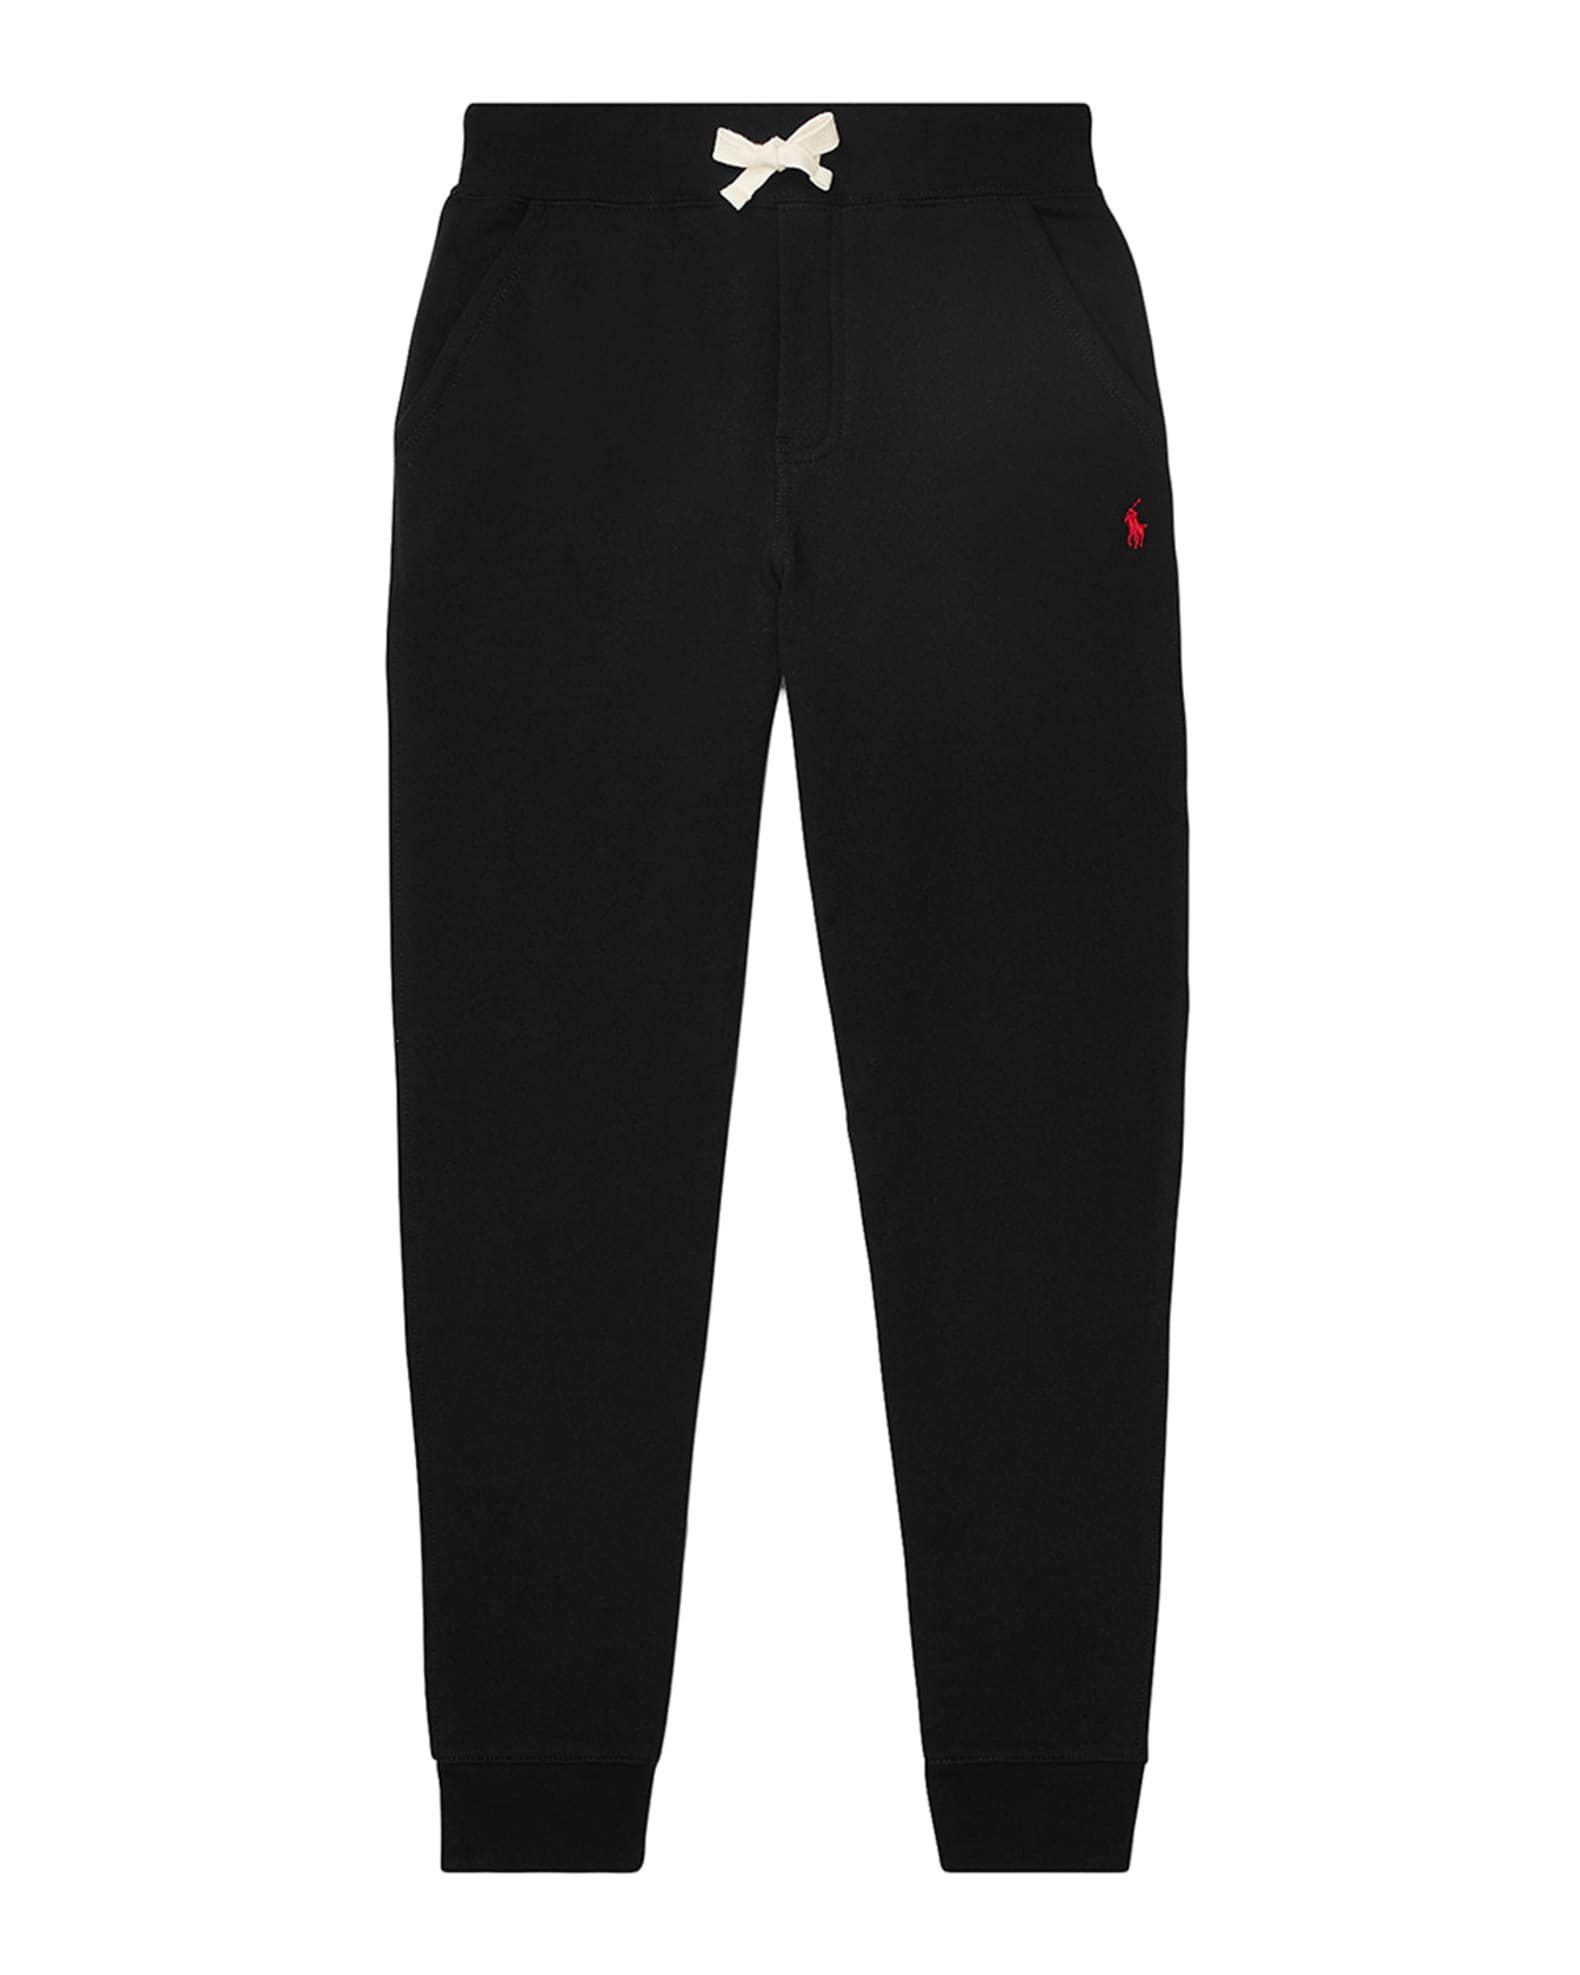 Ladies Fleece Casual Oversized Jogging Joggers Cuffed Tracksuit Bottoms  8-14